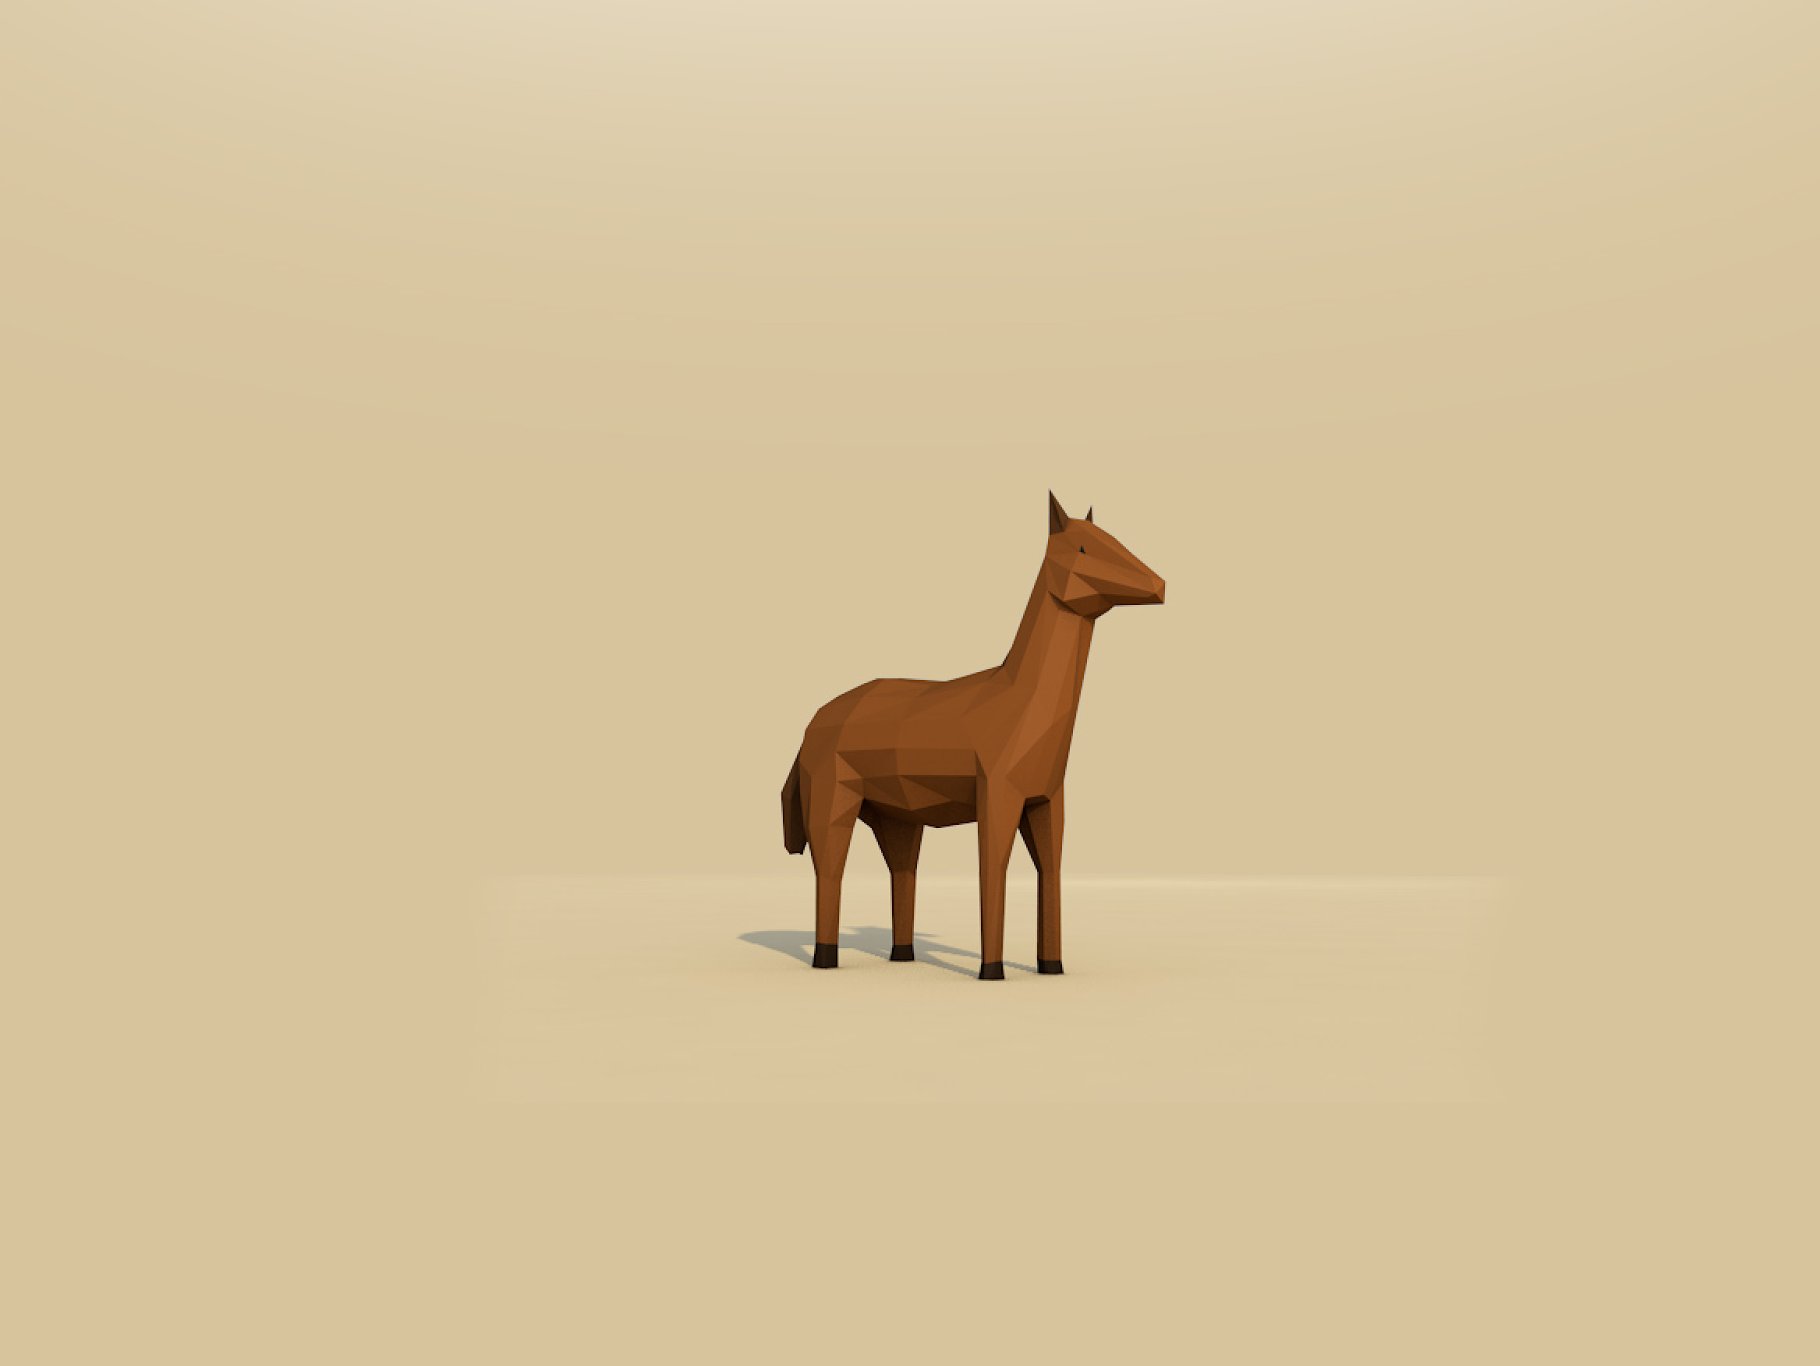 Mockup of a horse on a beige background.